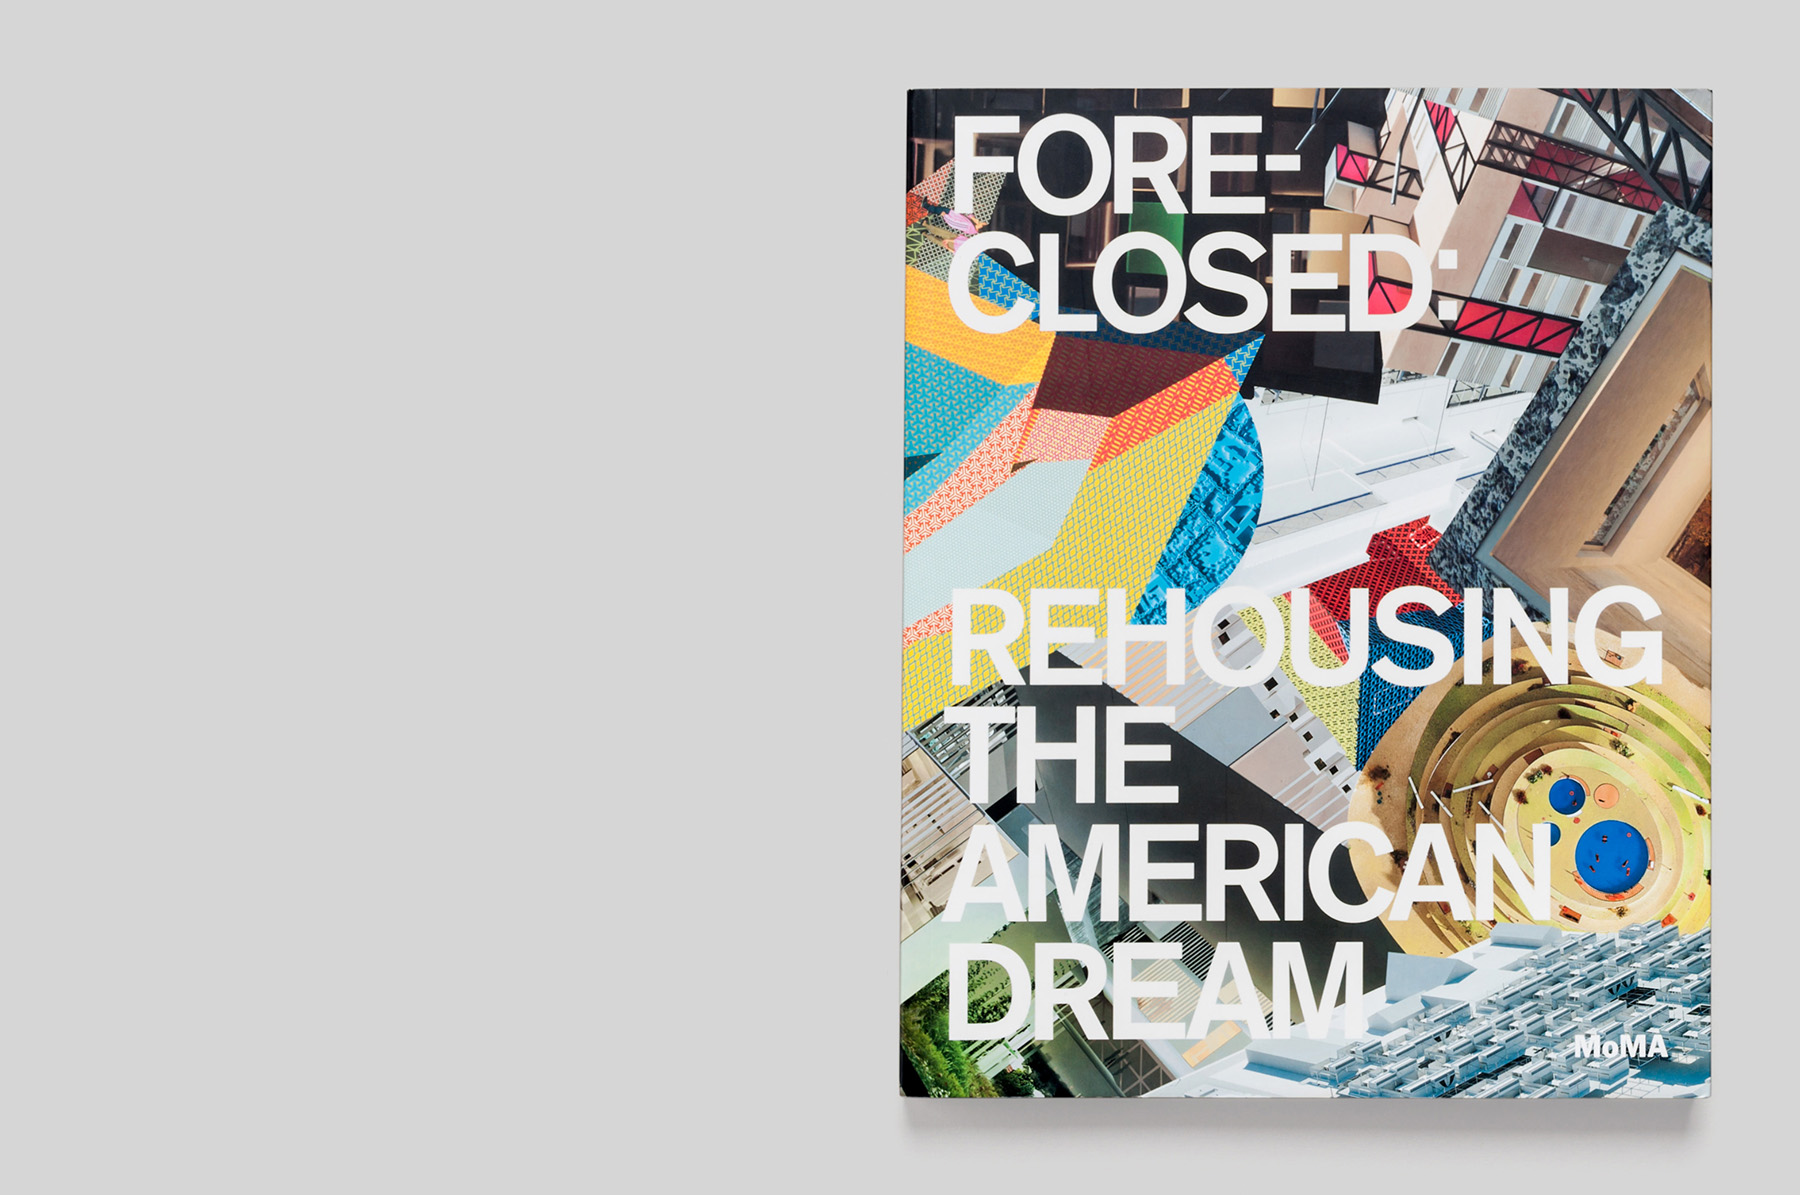 Foreclosed: Rehousing the American Dream exhibition catalog  - MTWTF